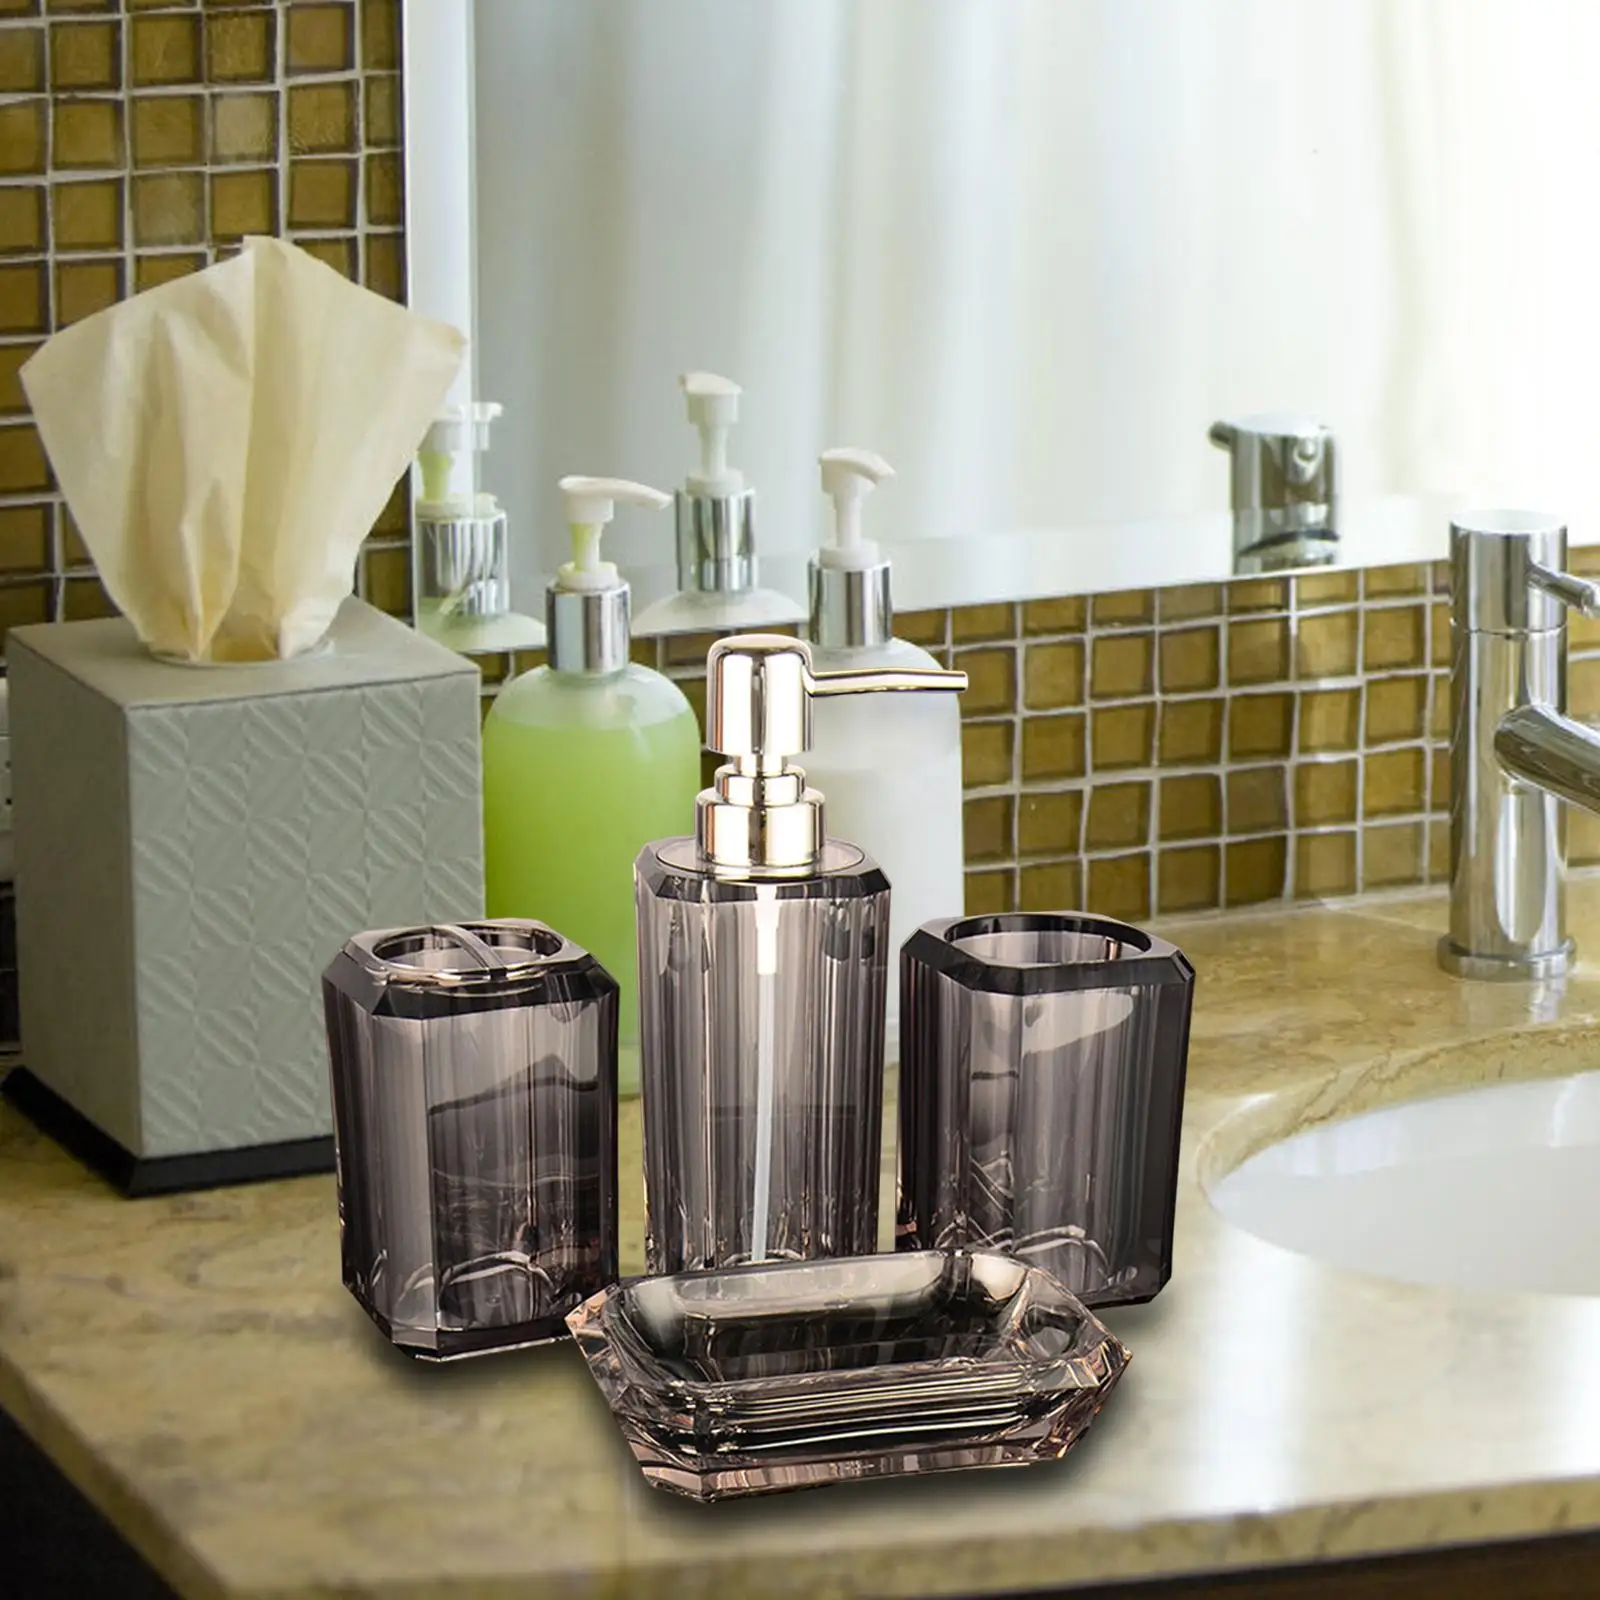 4Pcs Bath Accessory Toothbrush Holder Soap Dispenser Toothbrush Cup Decoration